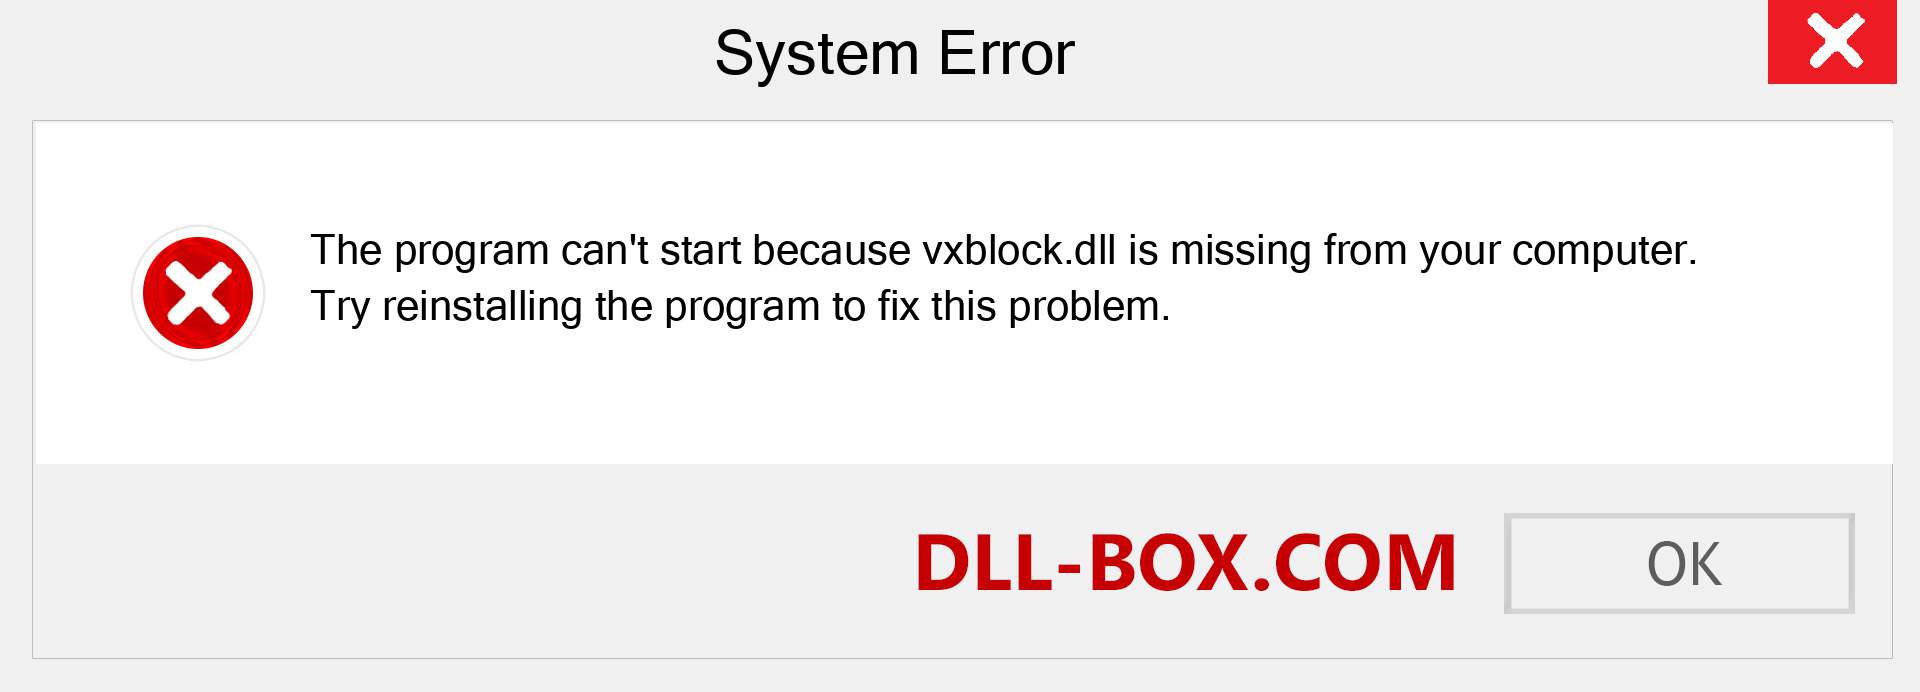  vxblock.dll file is missing?. Download for Windows 7, 8, 10 - Fix  vxblock dll Missing Error on Windows, photos, images